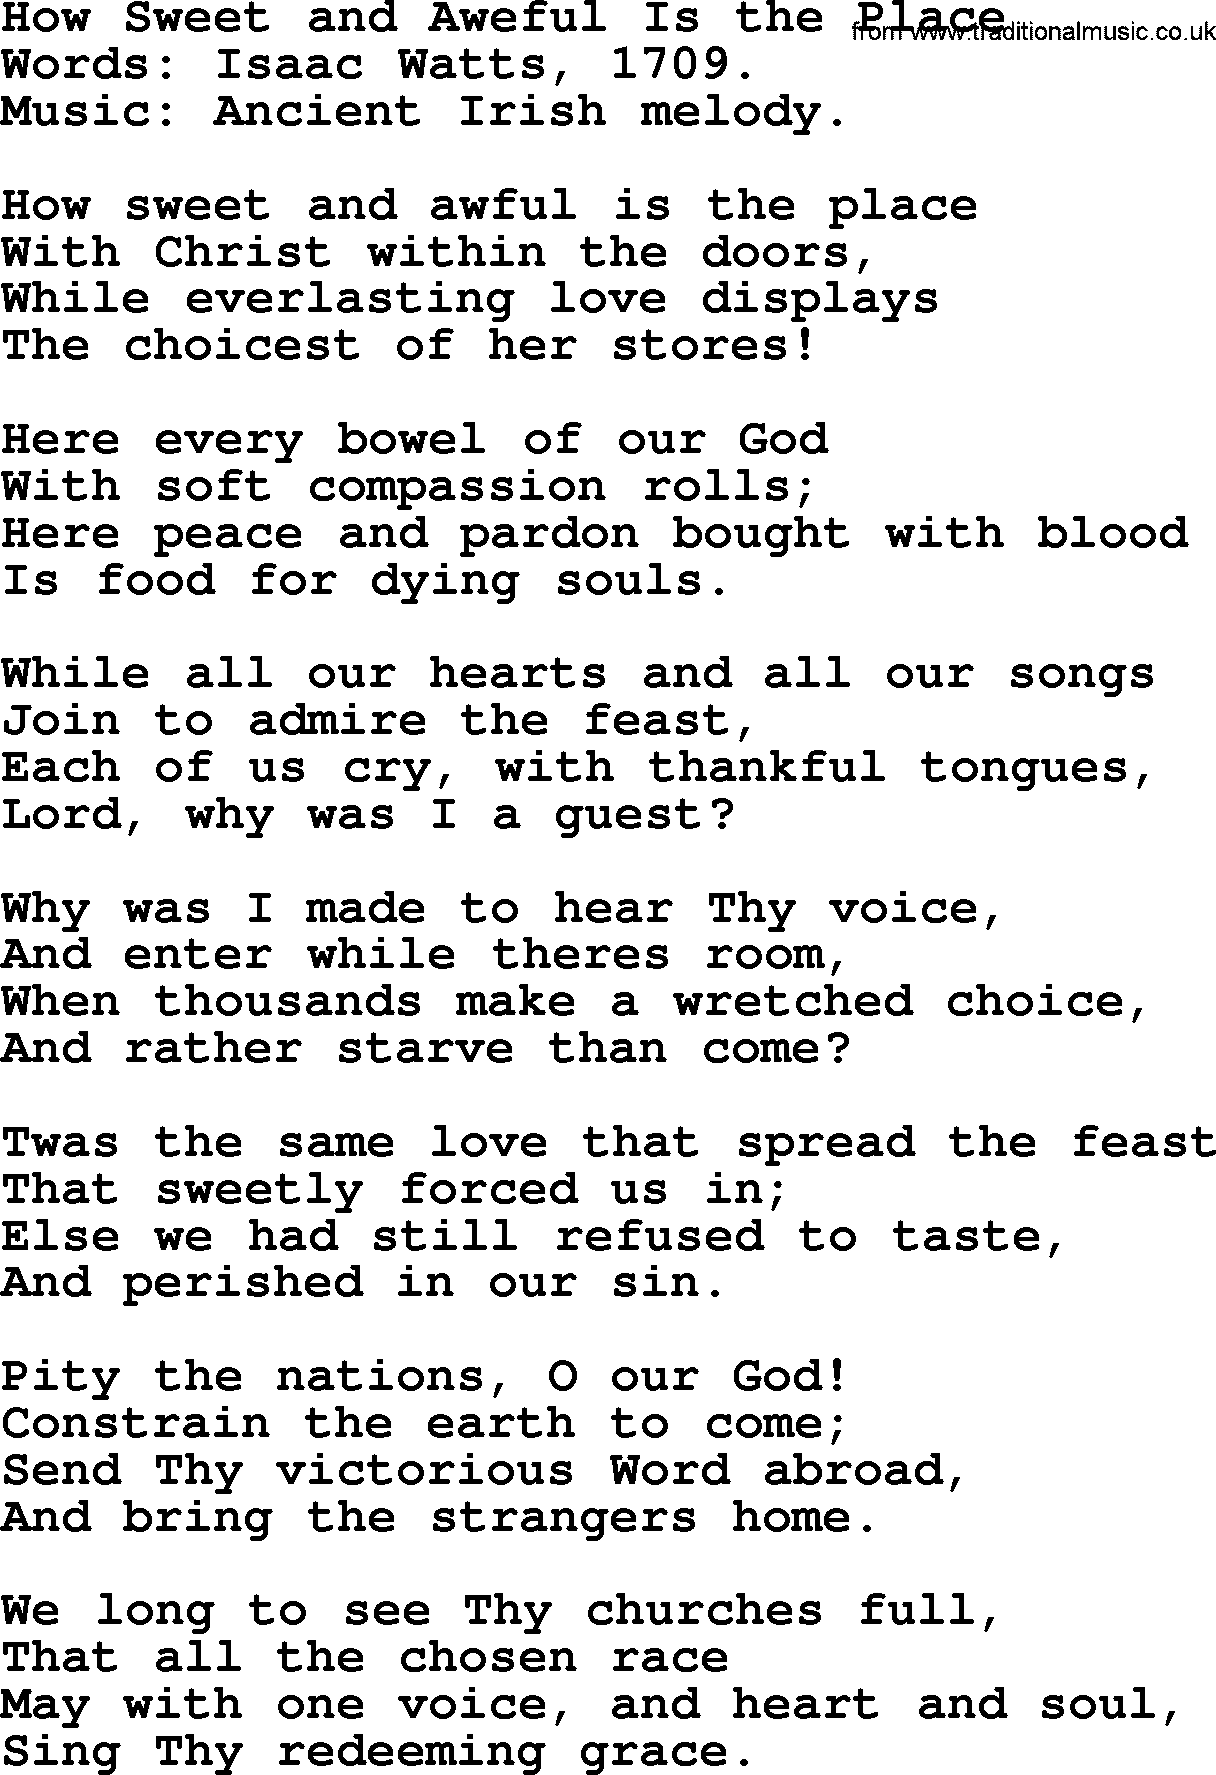 Isaac Watts Christian hymn: How Sweet and Aweful Is the Place- lyricss